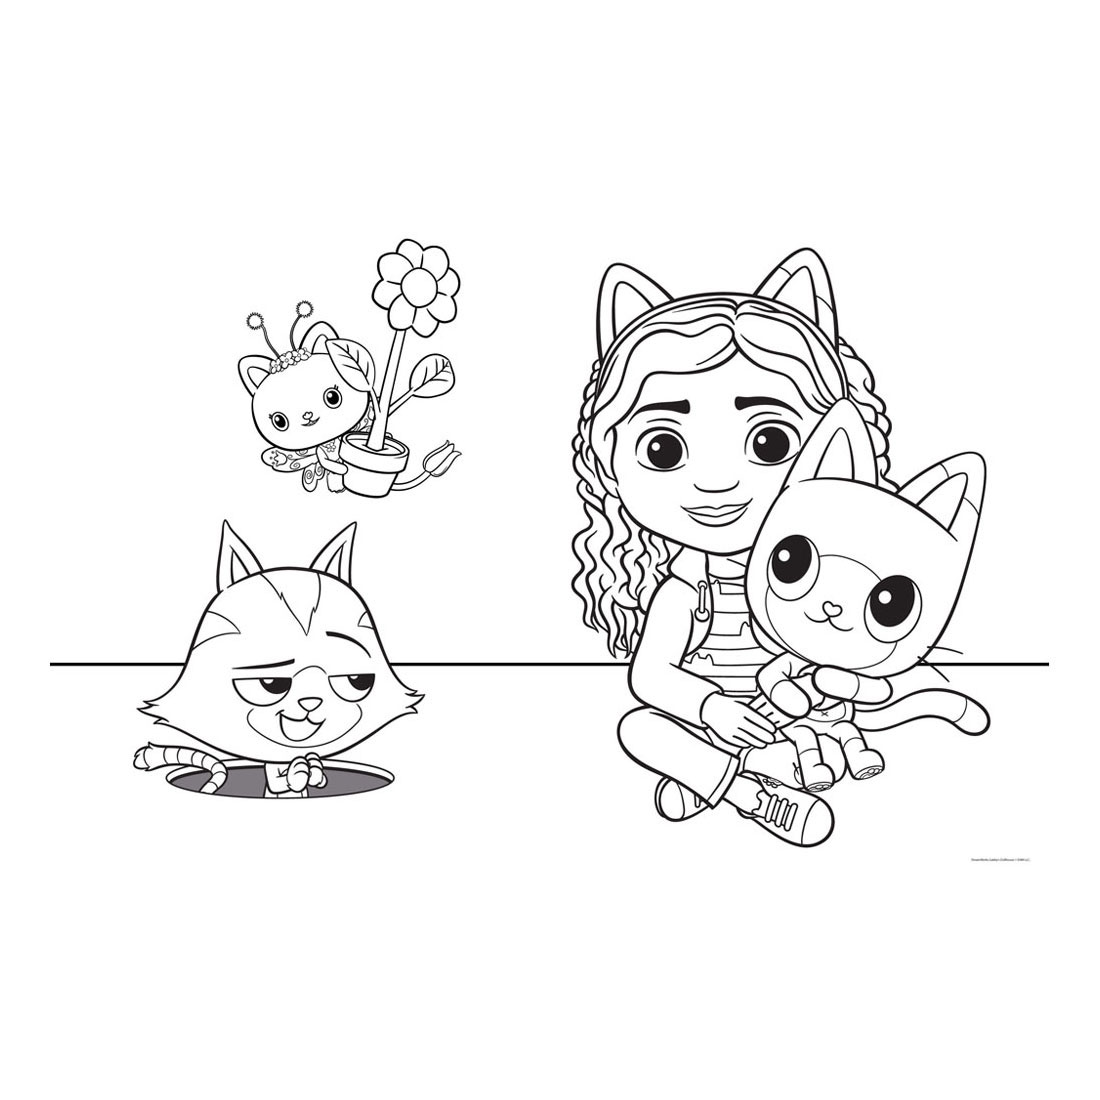 Gabby's Dollhouse Printable Coloring Pages - Printable Word Searches